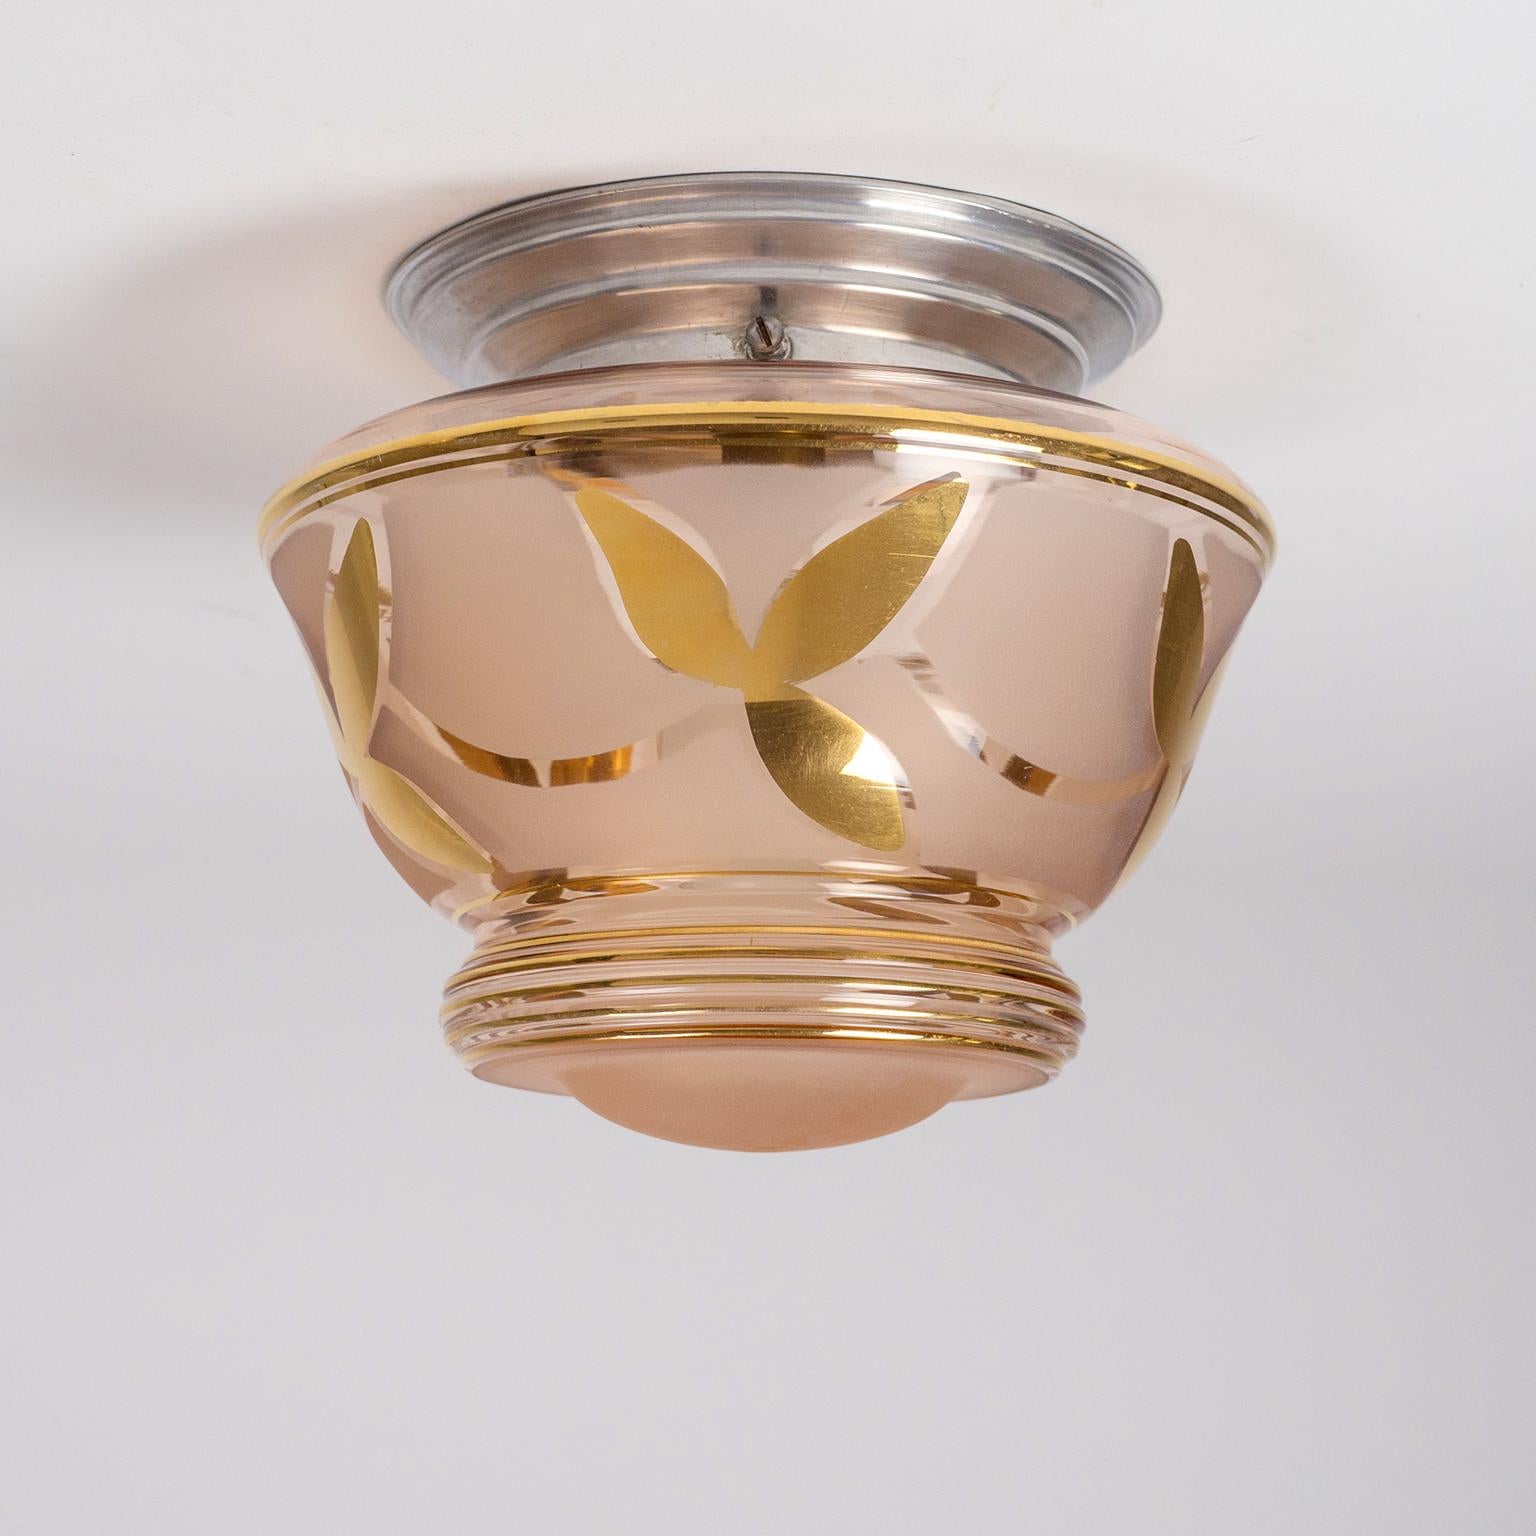 Charming French late Art Deco flush mount with a light Rosé colored glass. The lightly tinted and tiered glass diffuser has an abstract floral decor in gold paint and partial frostings. Very good original condition with barely any usage signs on the